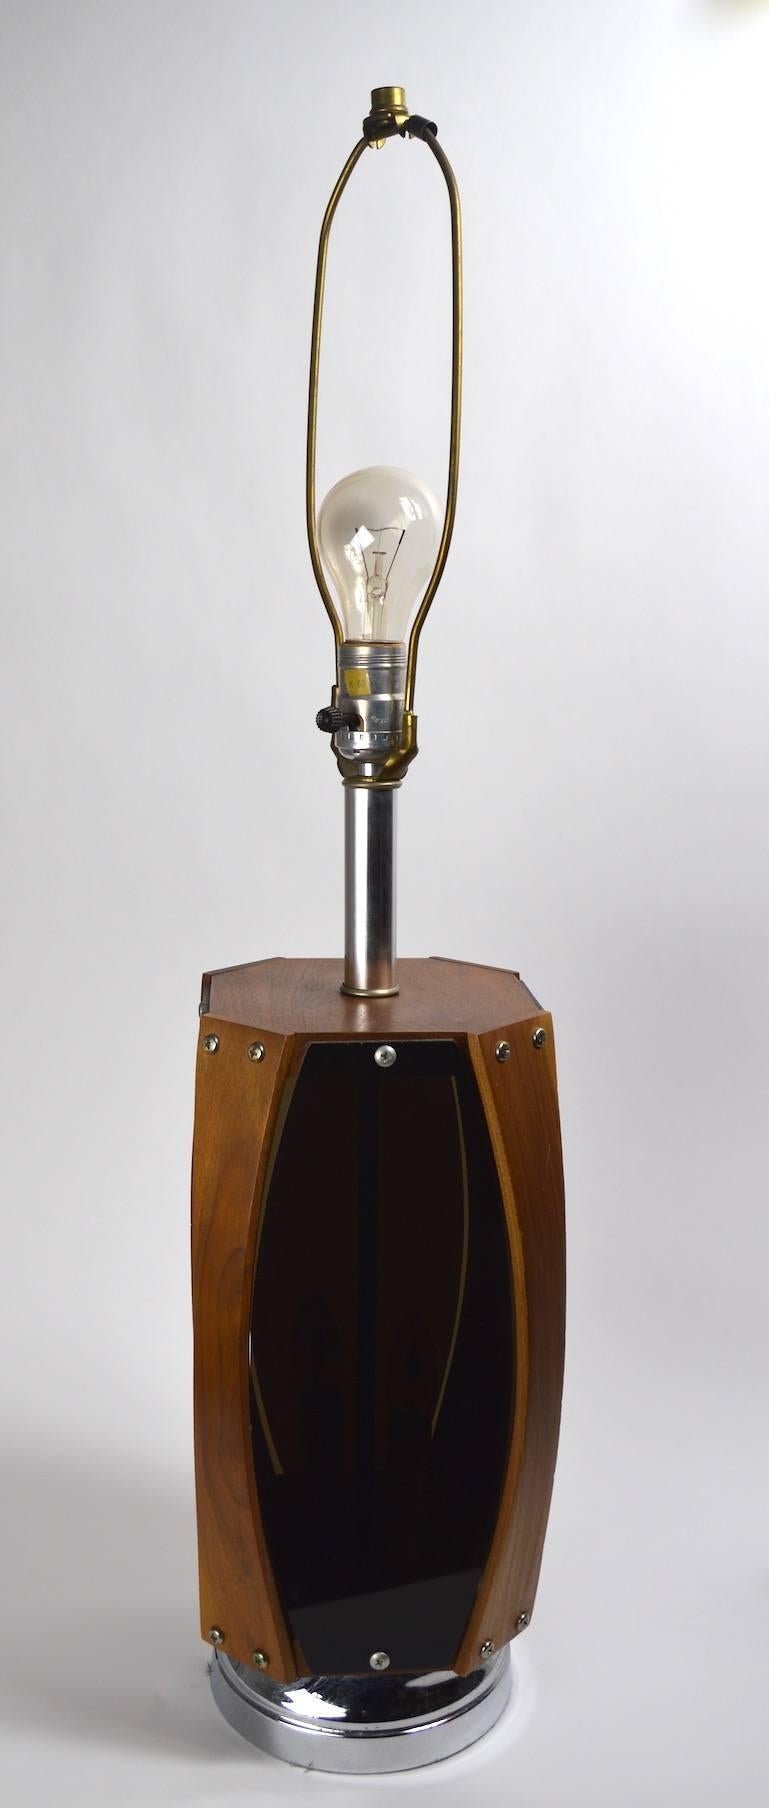 Pair of lamps manufactured by the Lawrin Lamp Company featuring a light up interior option in addition to the standard bulb at the top. The interior lights can be operated independently from the top bulb, making it possible to use the lights in